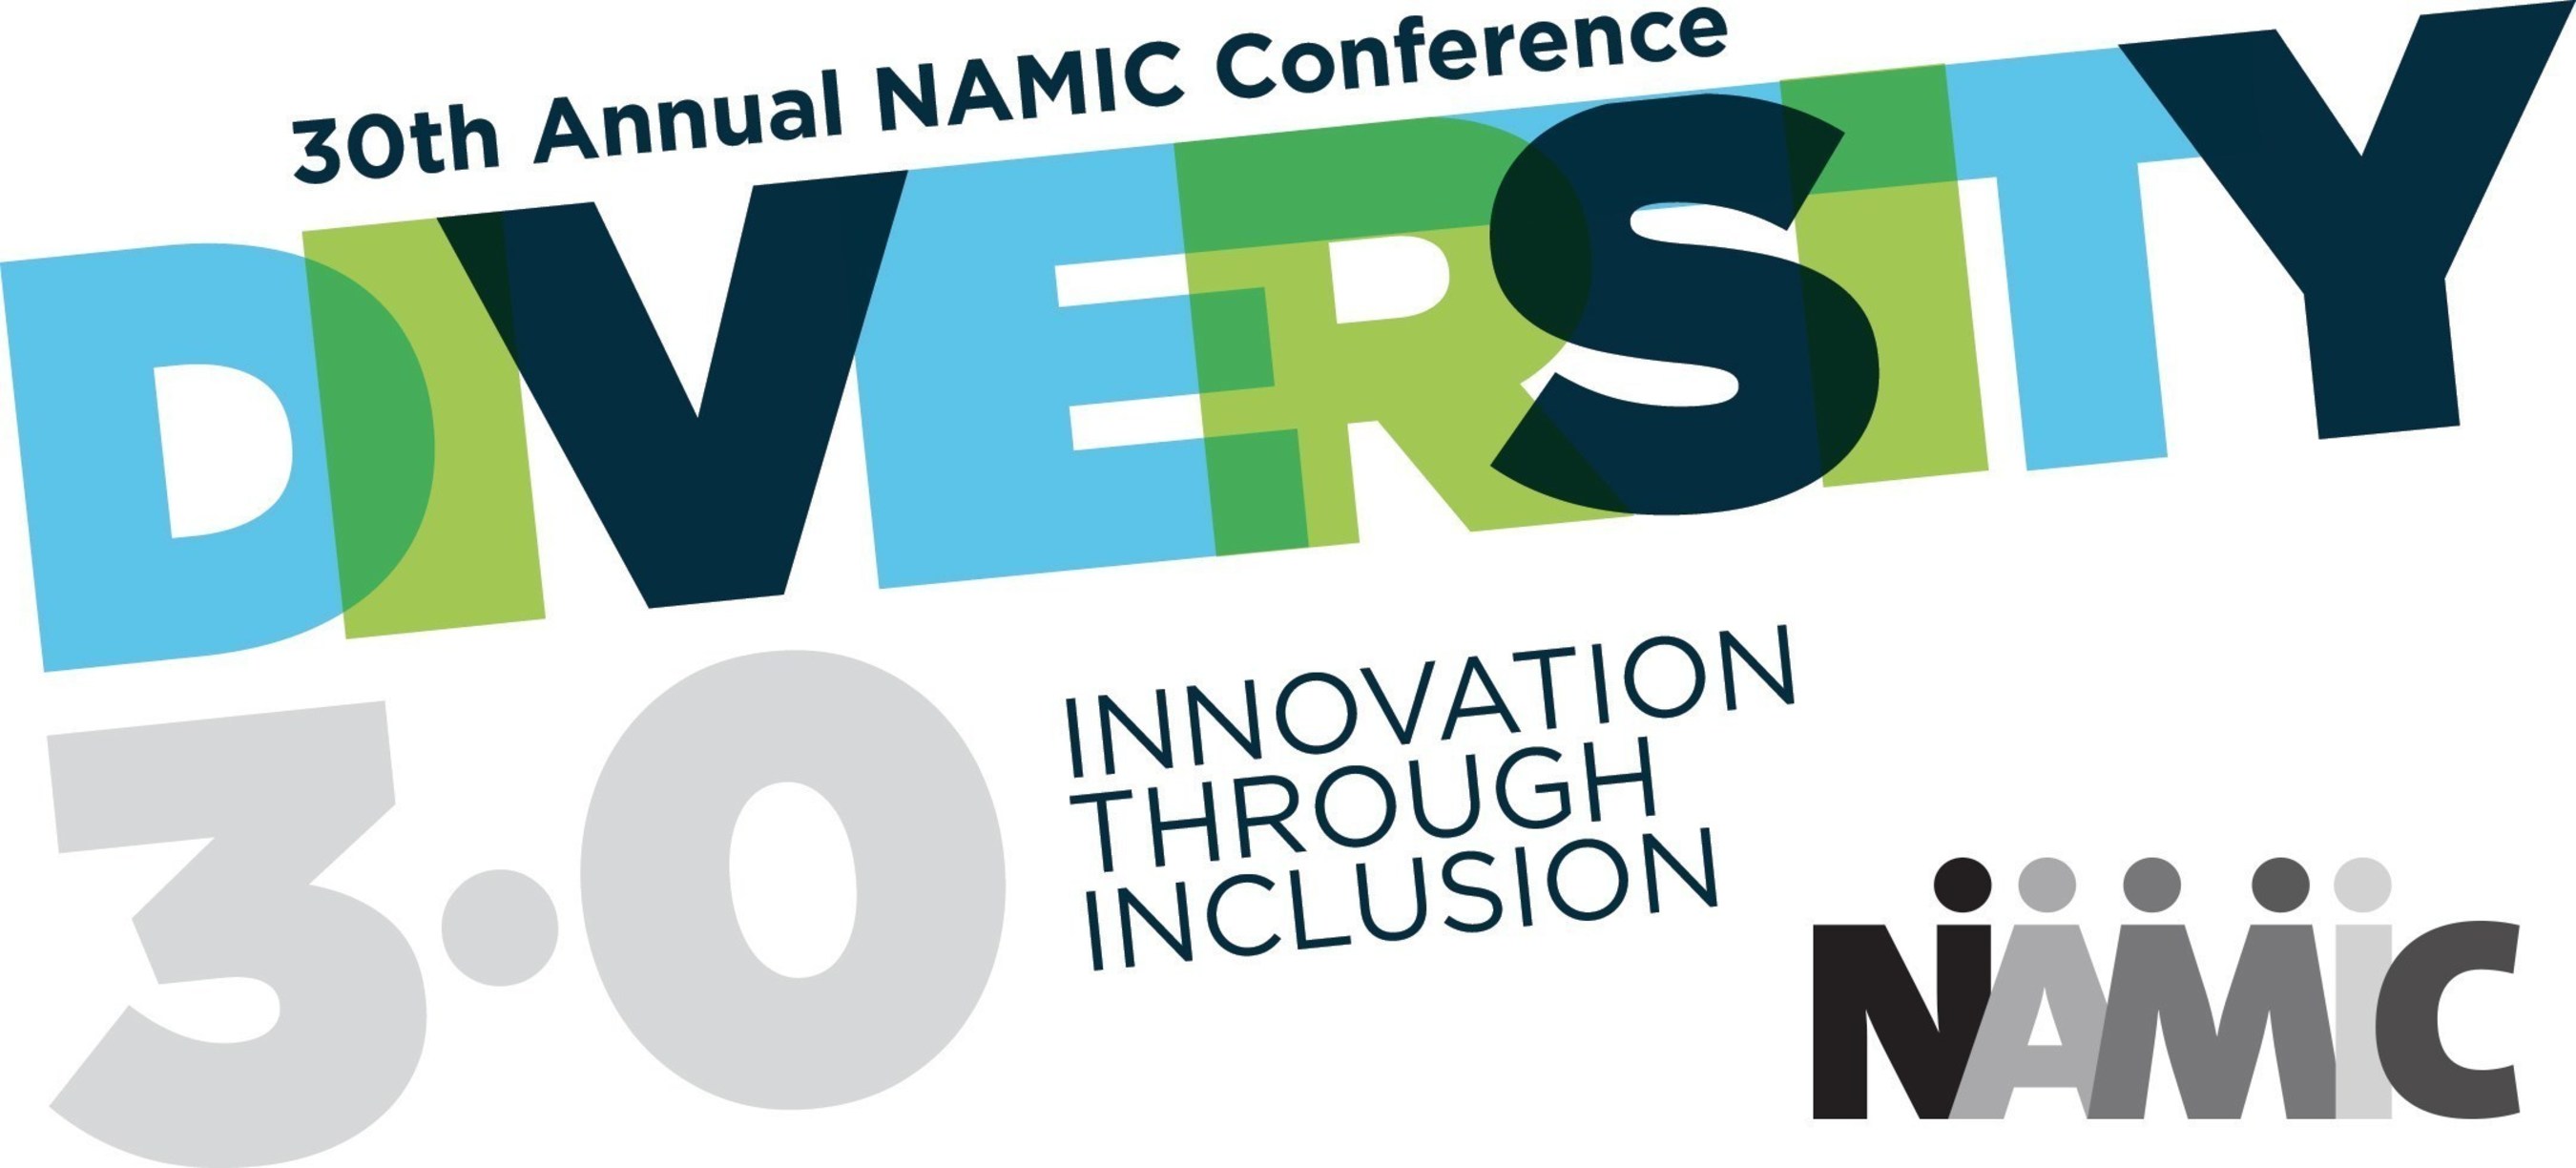 Official logo of the 30th Annual NAMIC Conference. Held as part of the television industry's Diversity Week, the 30th Annual NAMIC Conference is scheduled for September 20-21, 2016 at the New York Marriott Marquis.